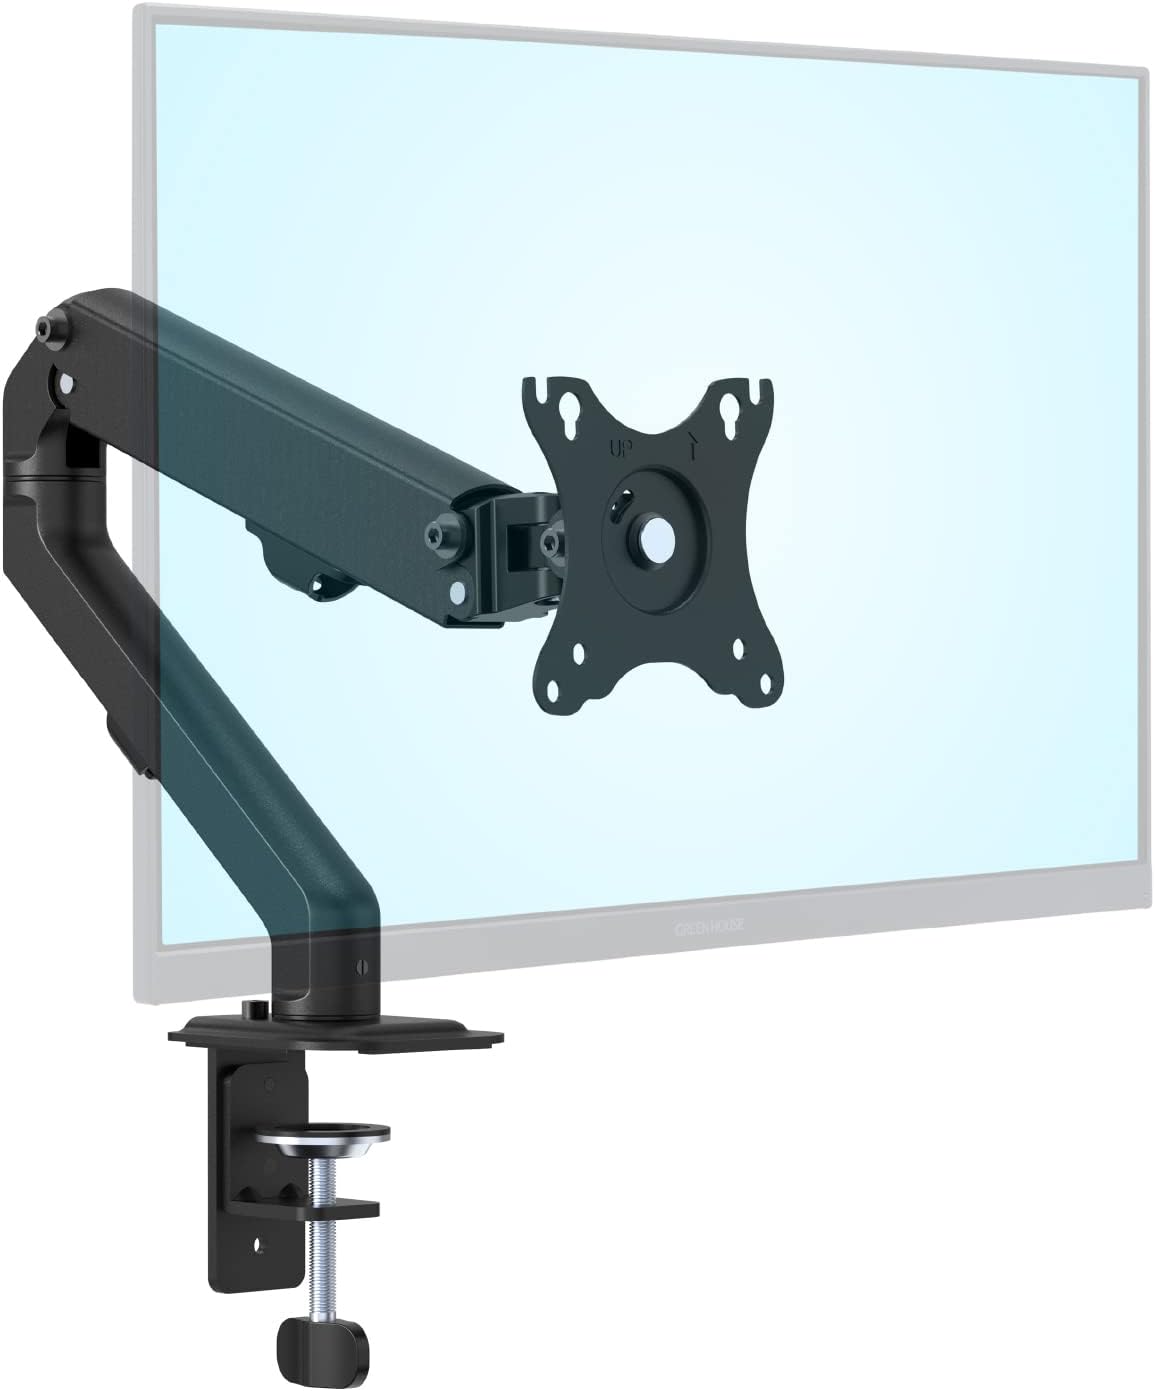 GREEN HOUSE Single Monitor Mount, Adjustable Mechanical Monitor Arm, Swivel Vesa fits for 17-27 inch, max Load 15.5 lbs GH-UAMDF1-BK